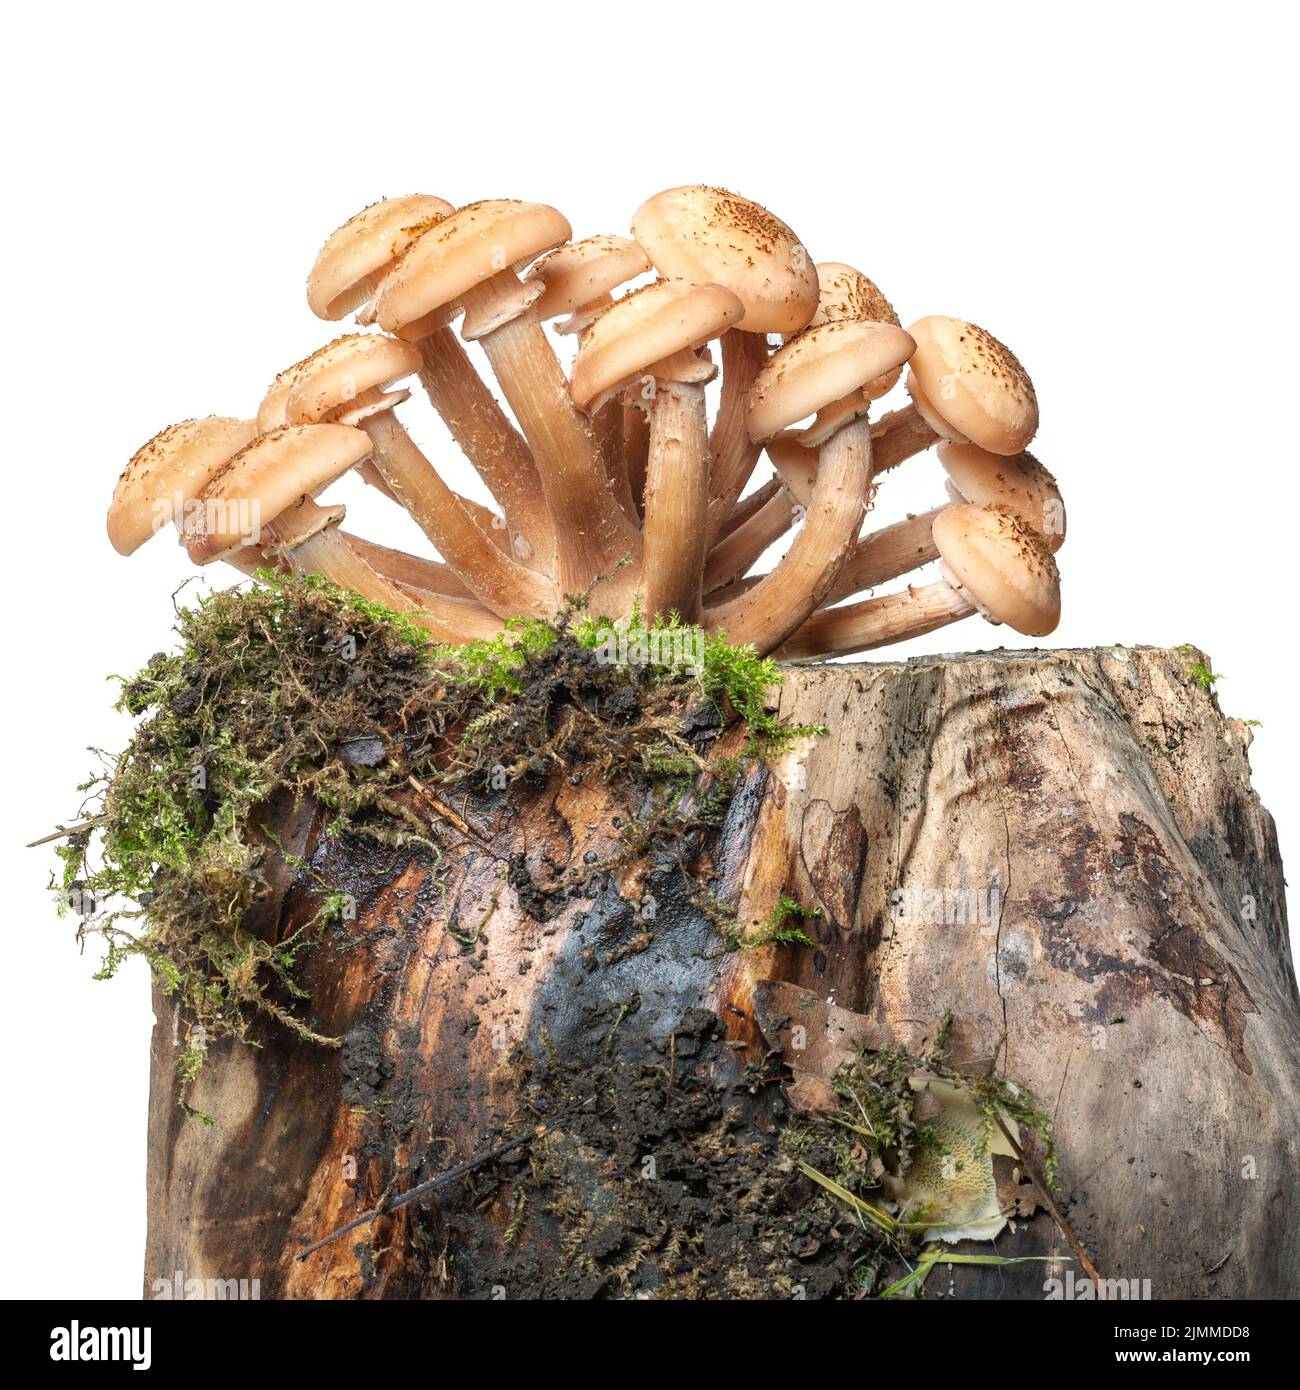 Forest mushrooms of Honey fungus Armillaria isolated on stump and moss Stock Photo